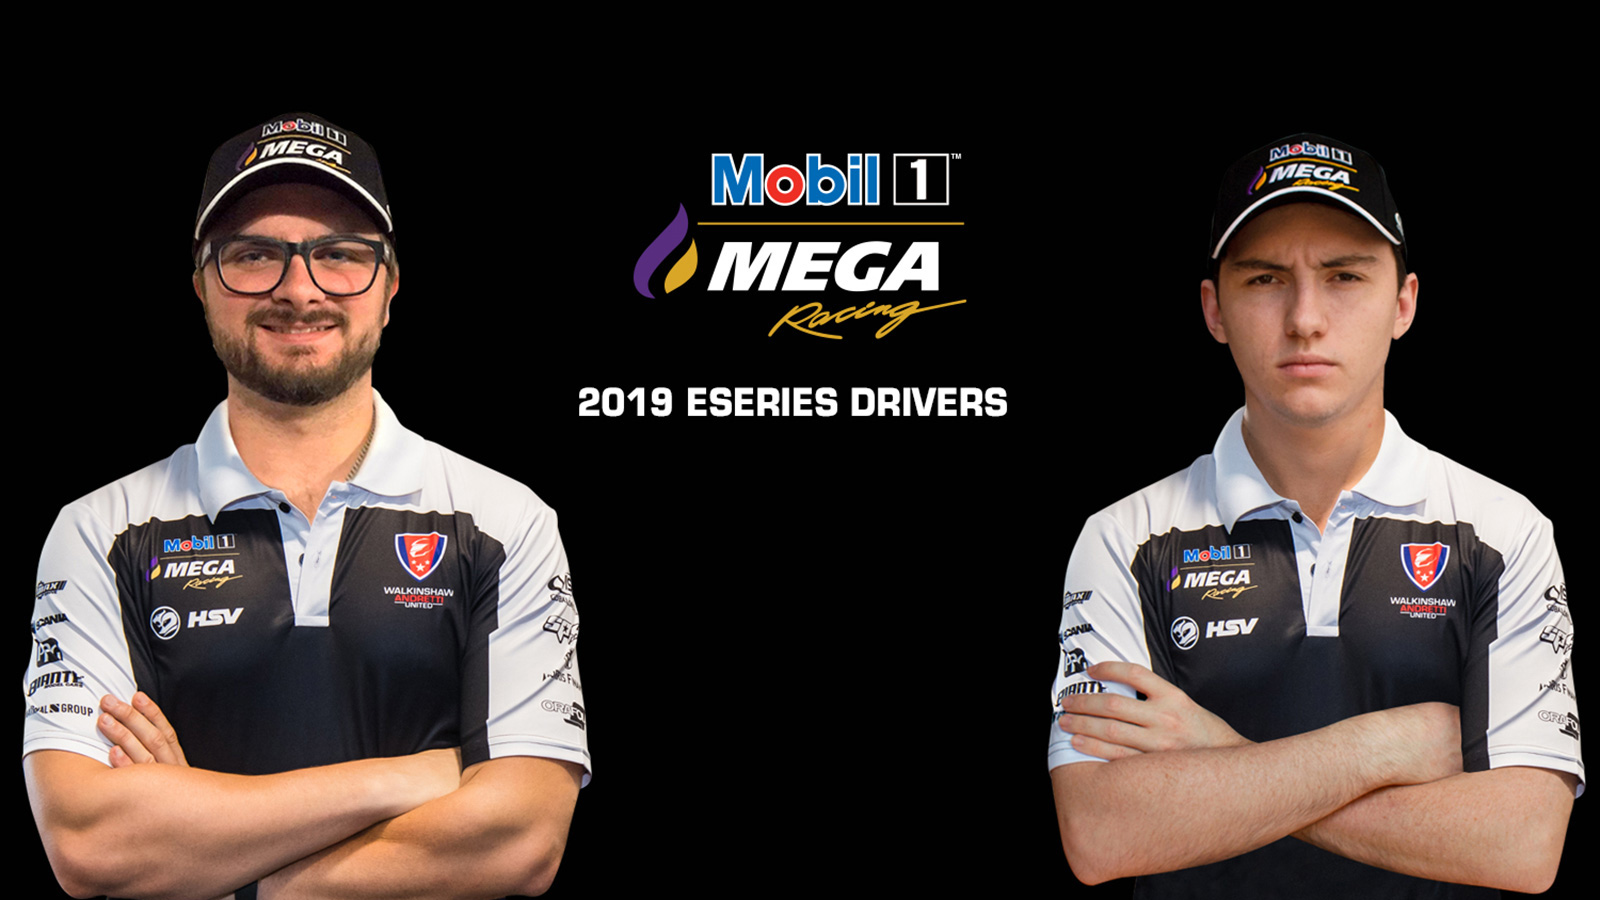 Jarred and Josh are the Team’s inaugural Eseries drivers.